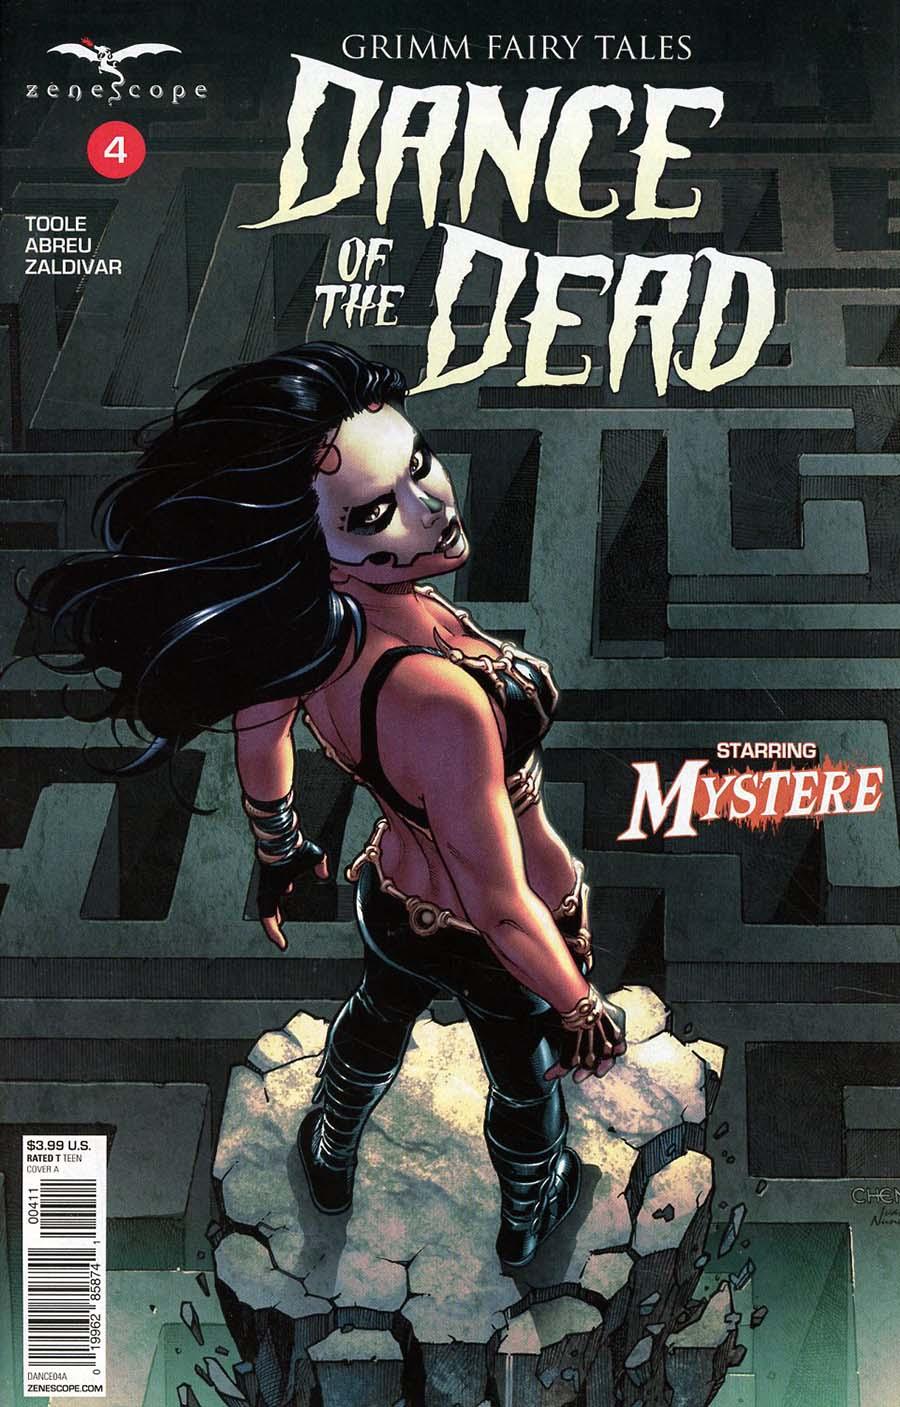 Grimm Fairy Tales Presents Dance Of The Dead Vol. 1 #4